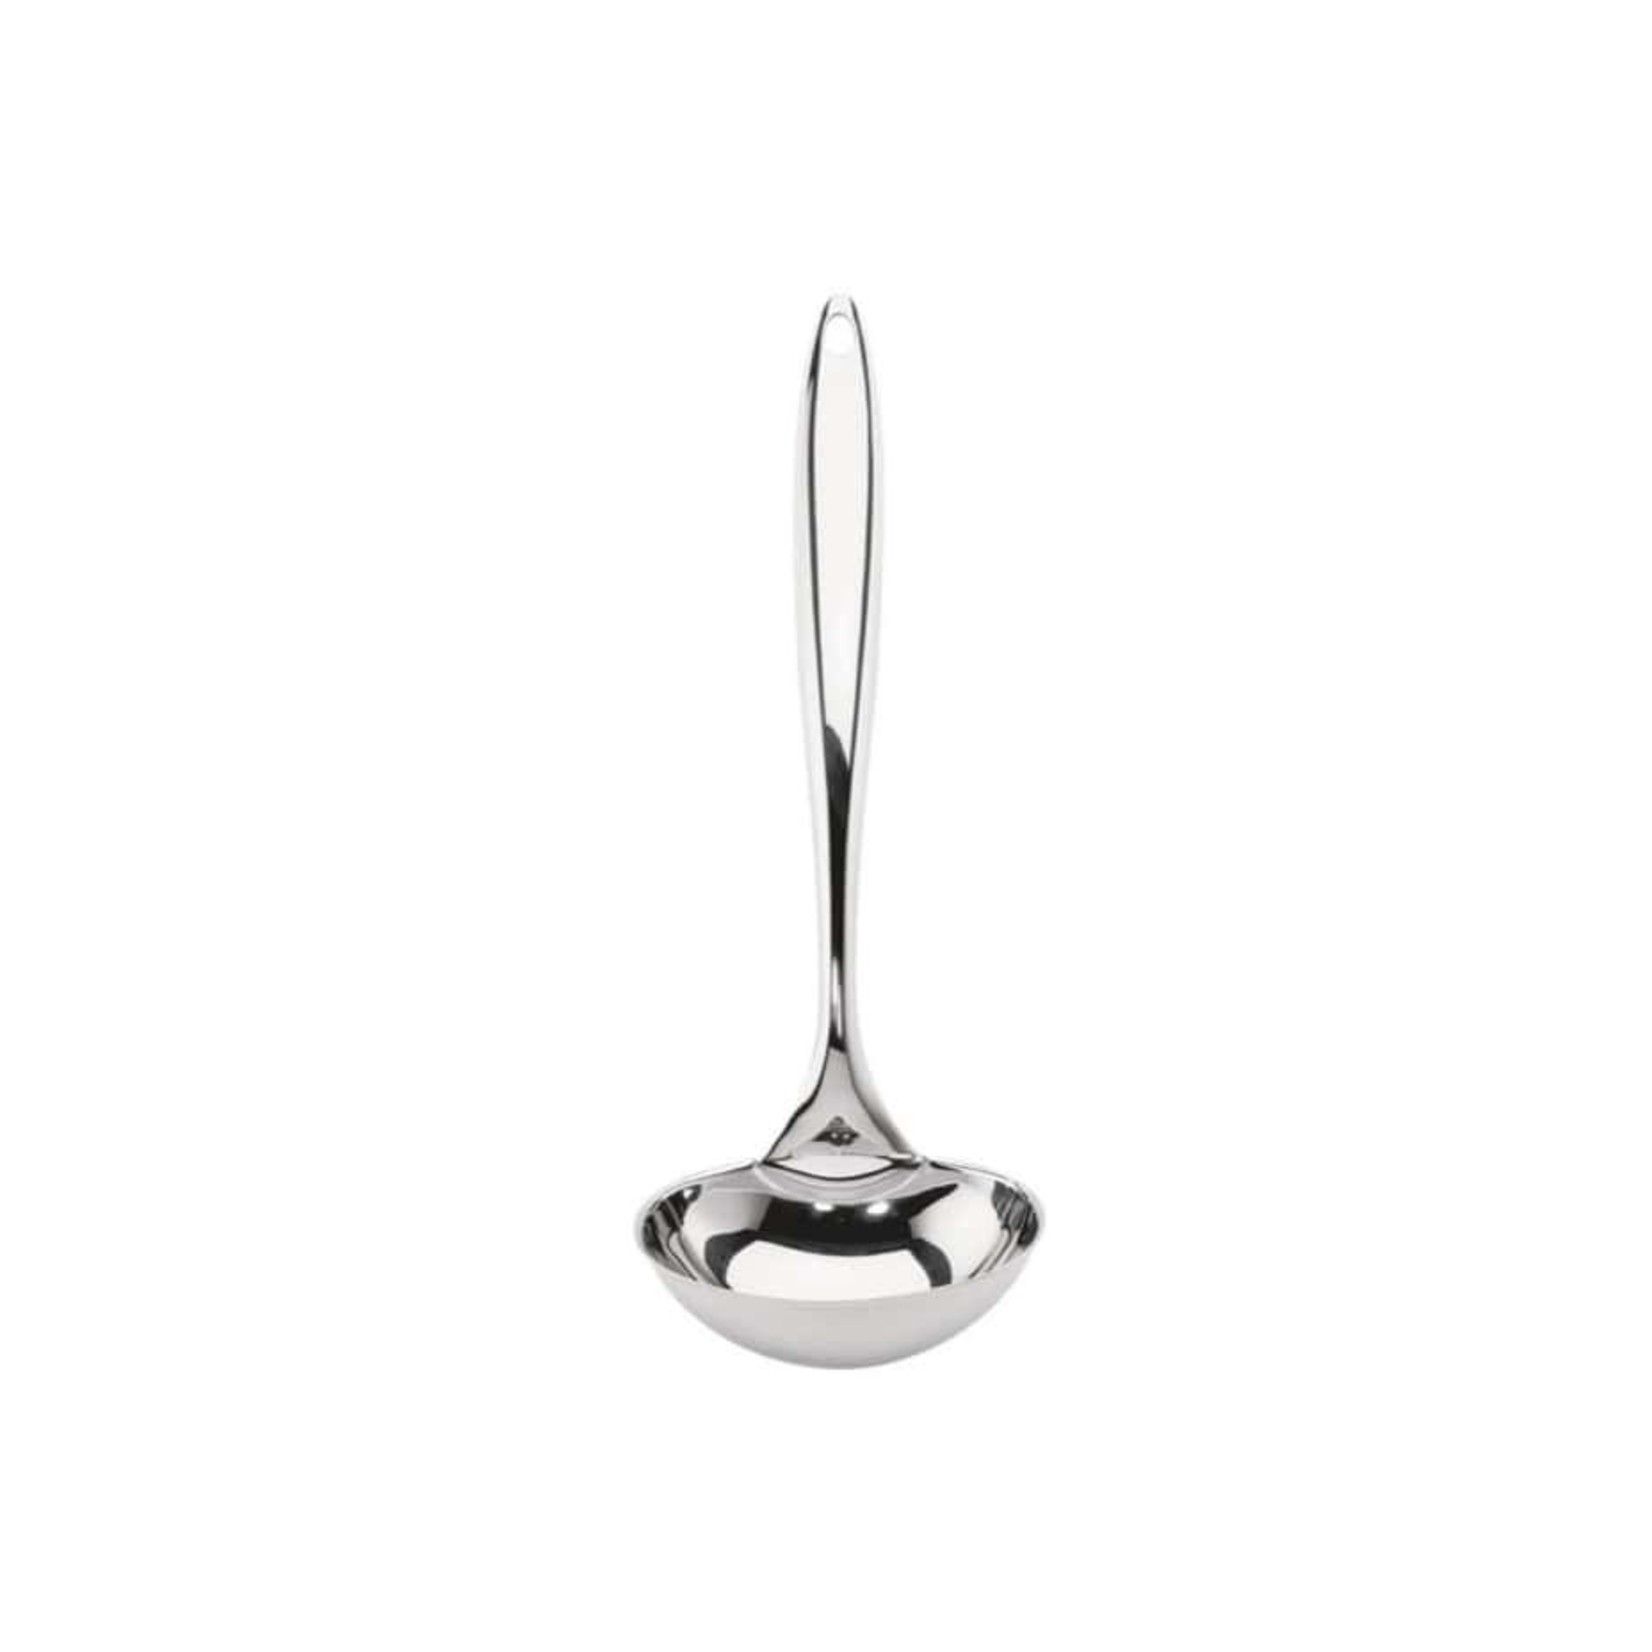 CUISIPRO CUISIPRO Eclipse Ladle 10'' - Stainless